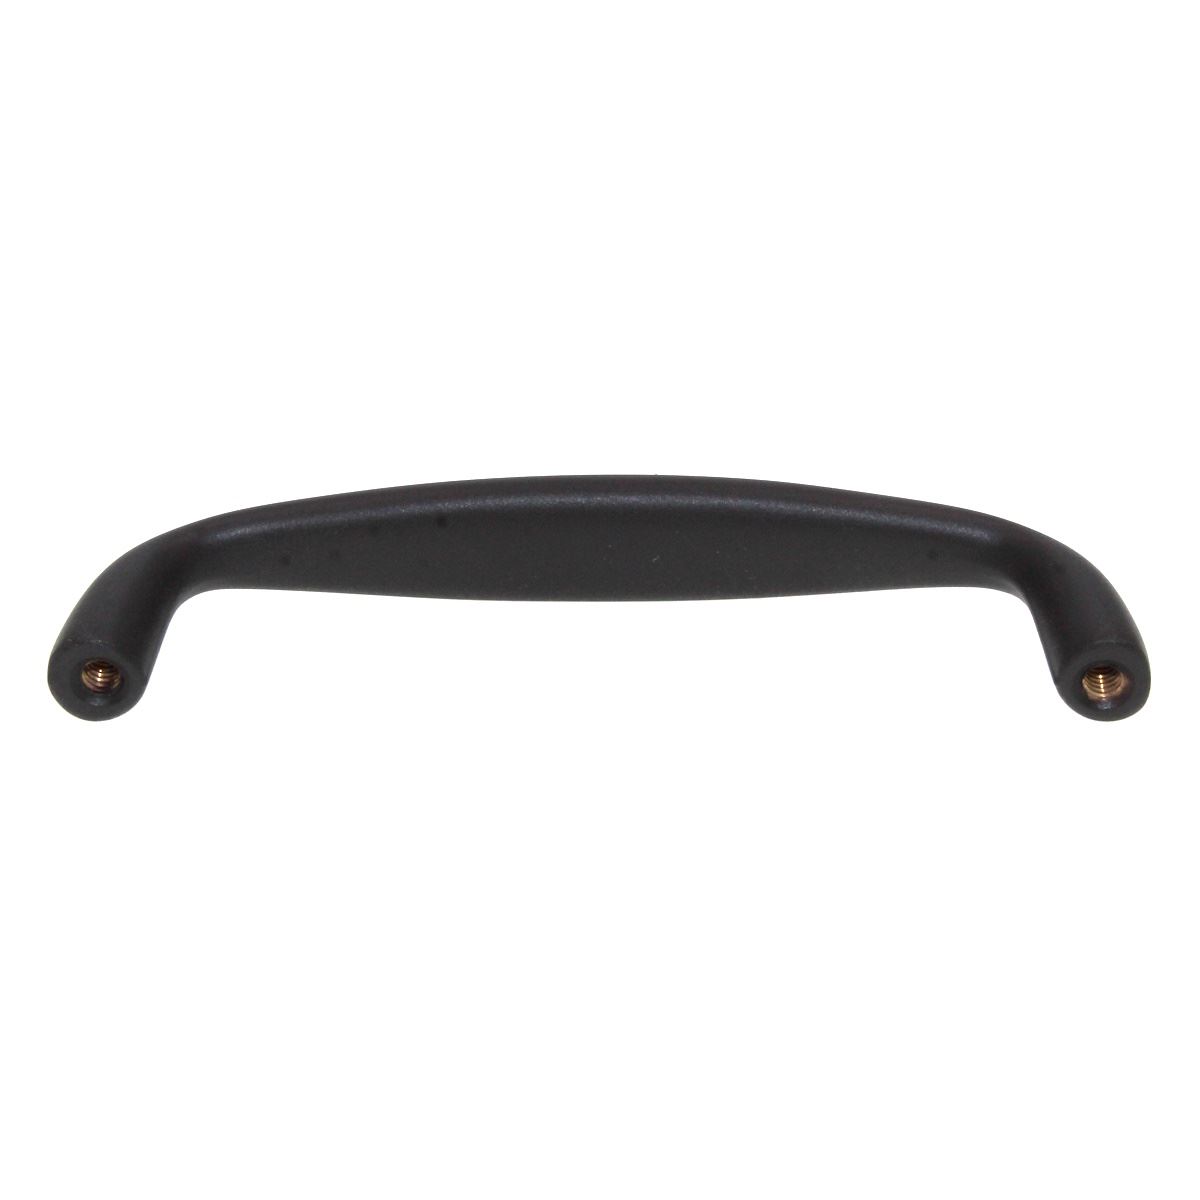 Schaub And Company Traditional Cabinet Pull 4" Ctr Oil-Rubbed Bronze 732-10B